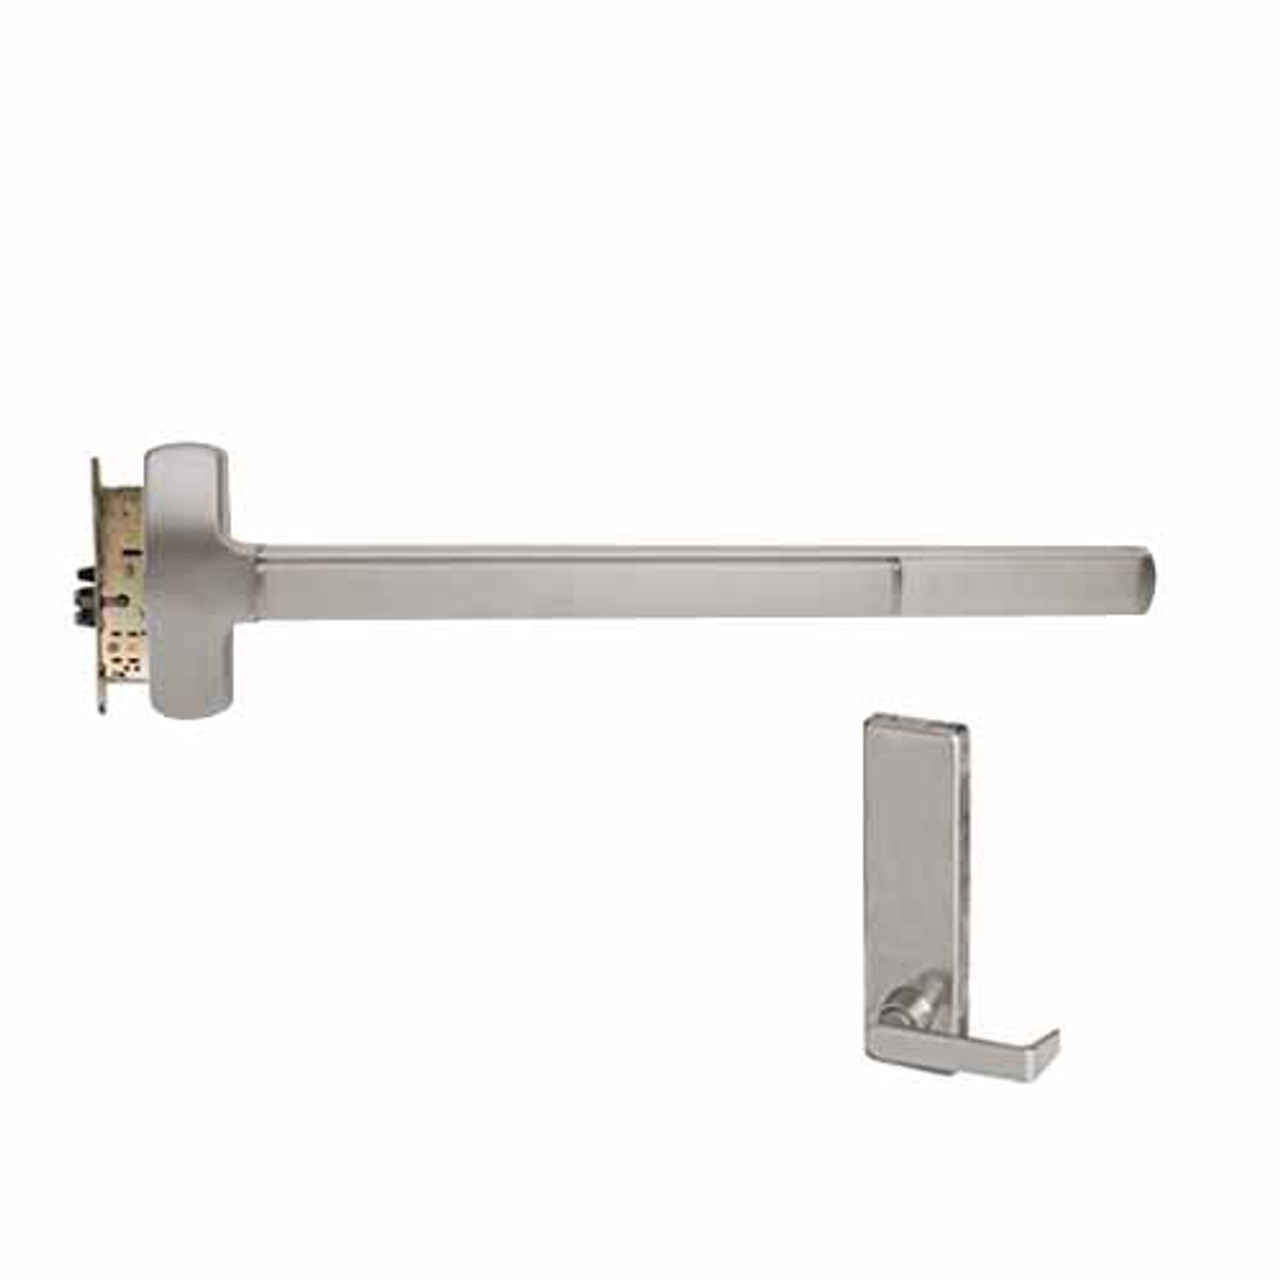 F-25-M-L-DT-Dane-US32D-4-LHR Falcon Exit Device in Satin Stainless Steel